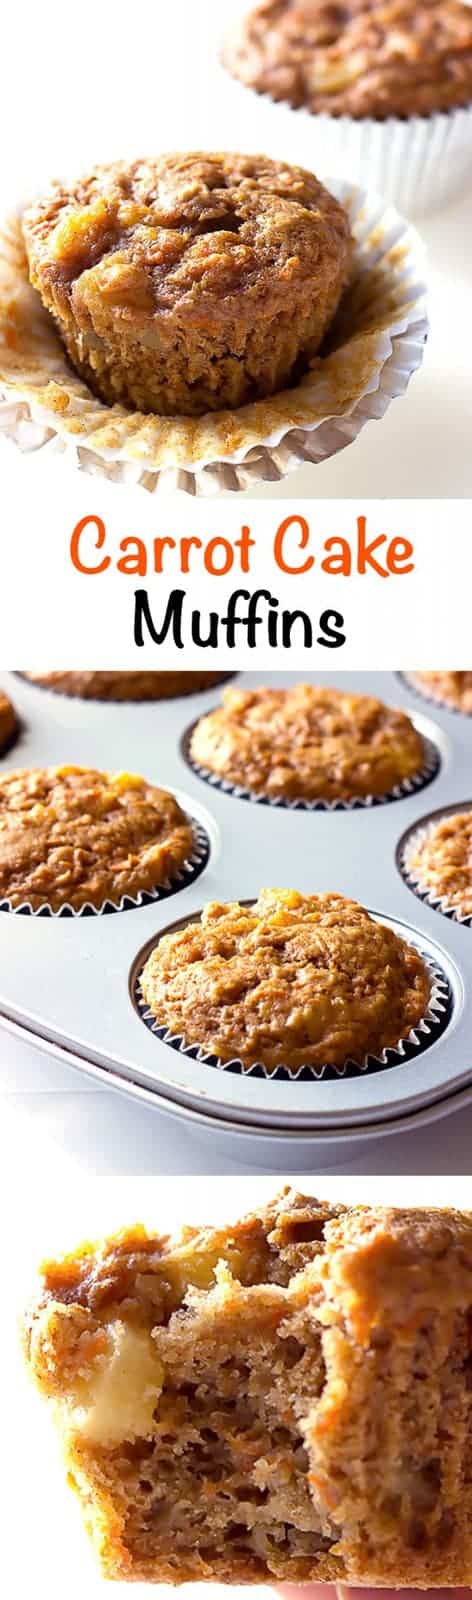 3 image collage with text showing Carrot Cake Muffins